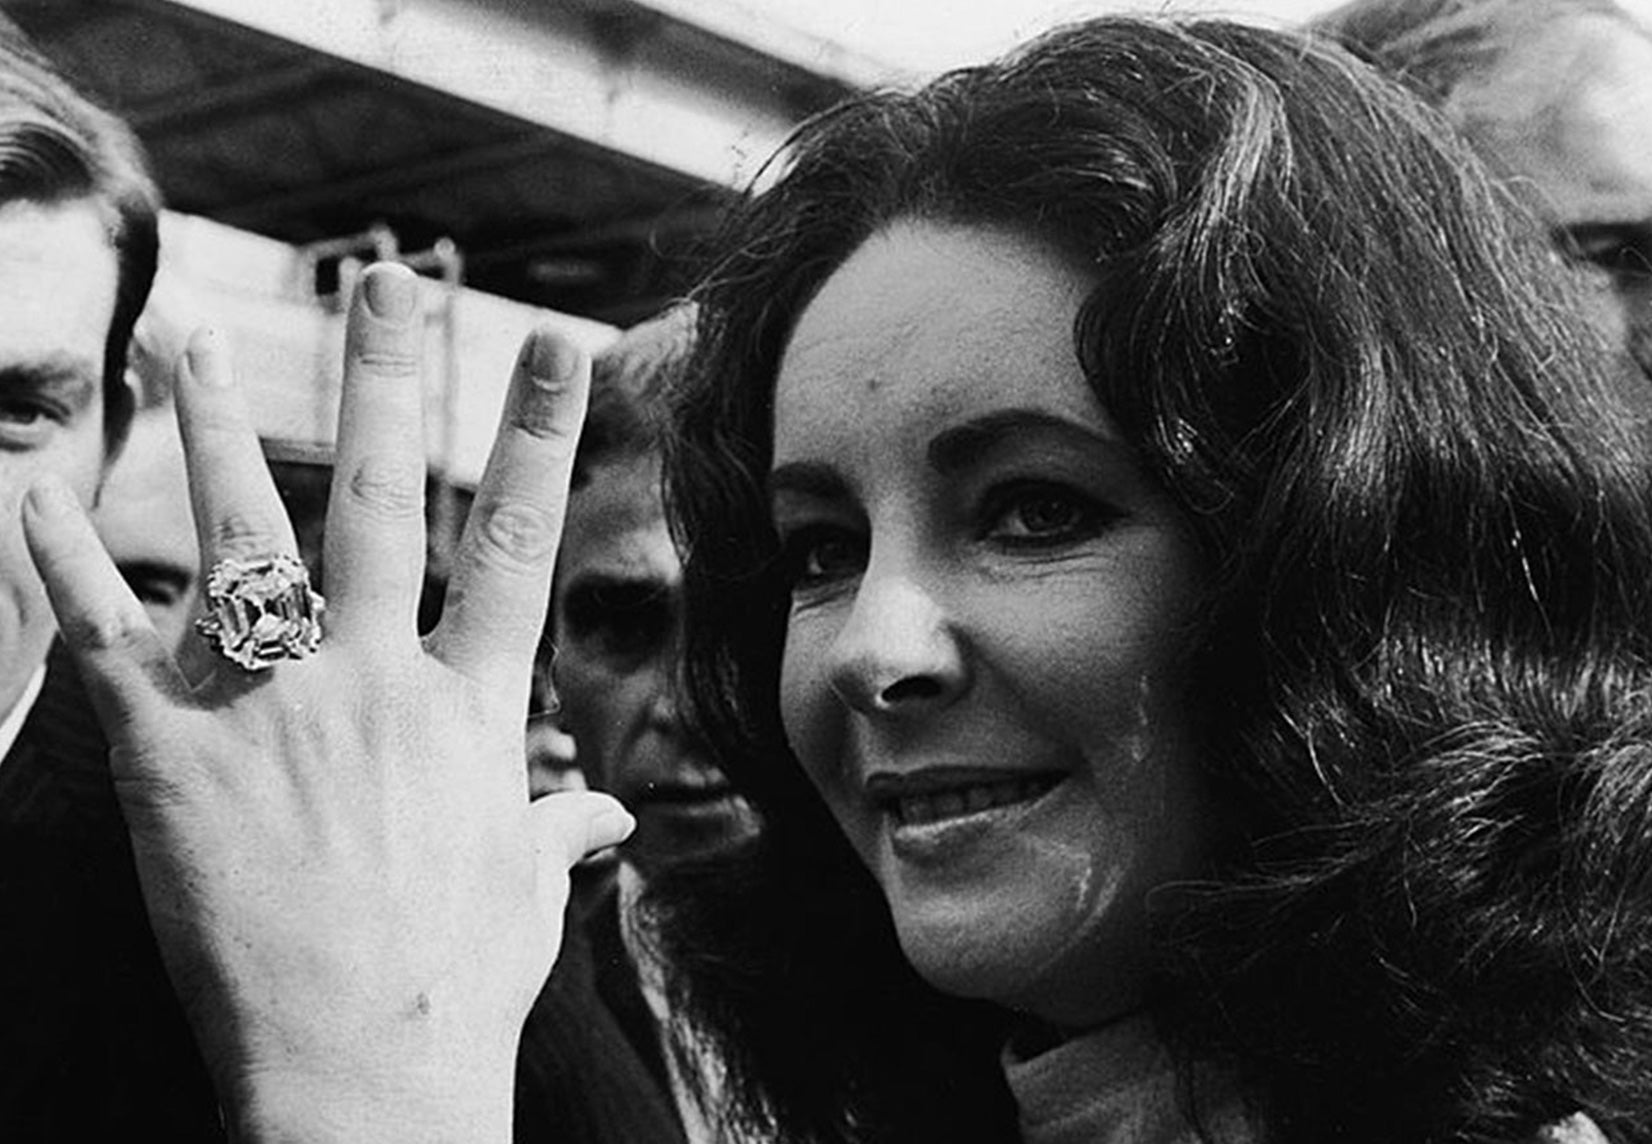 The 65 Best Celebrity Engagement Rings of All Time - hitched.co.uk